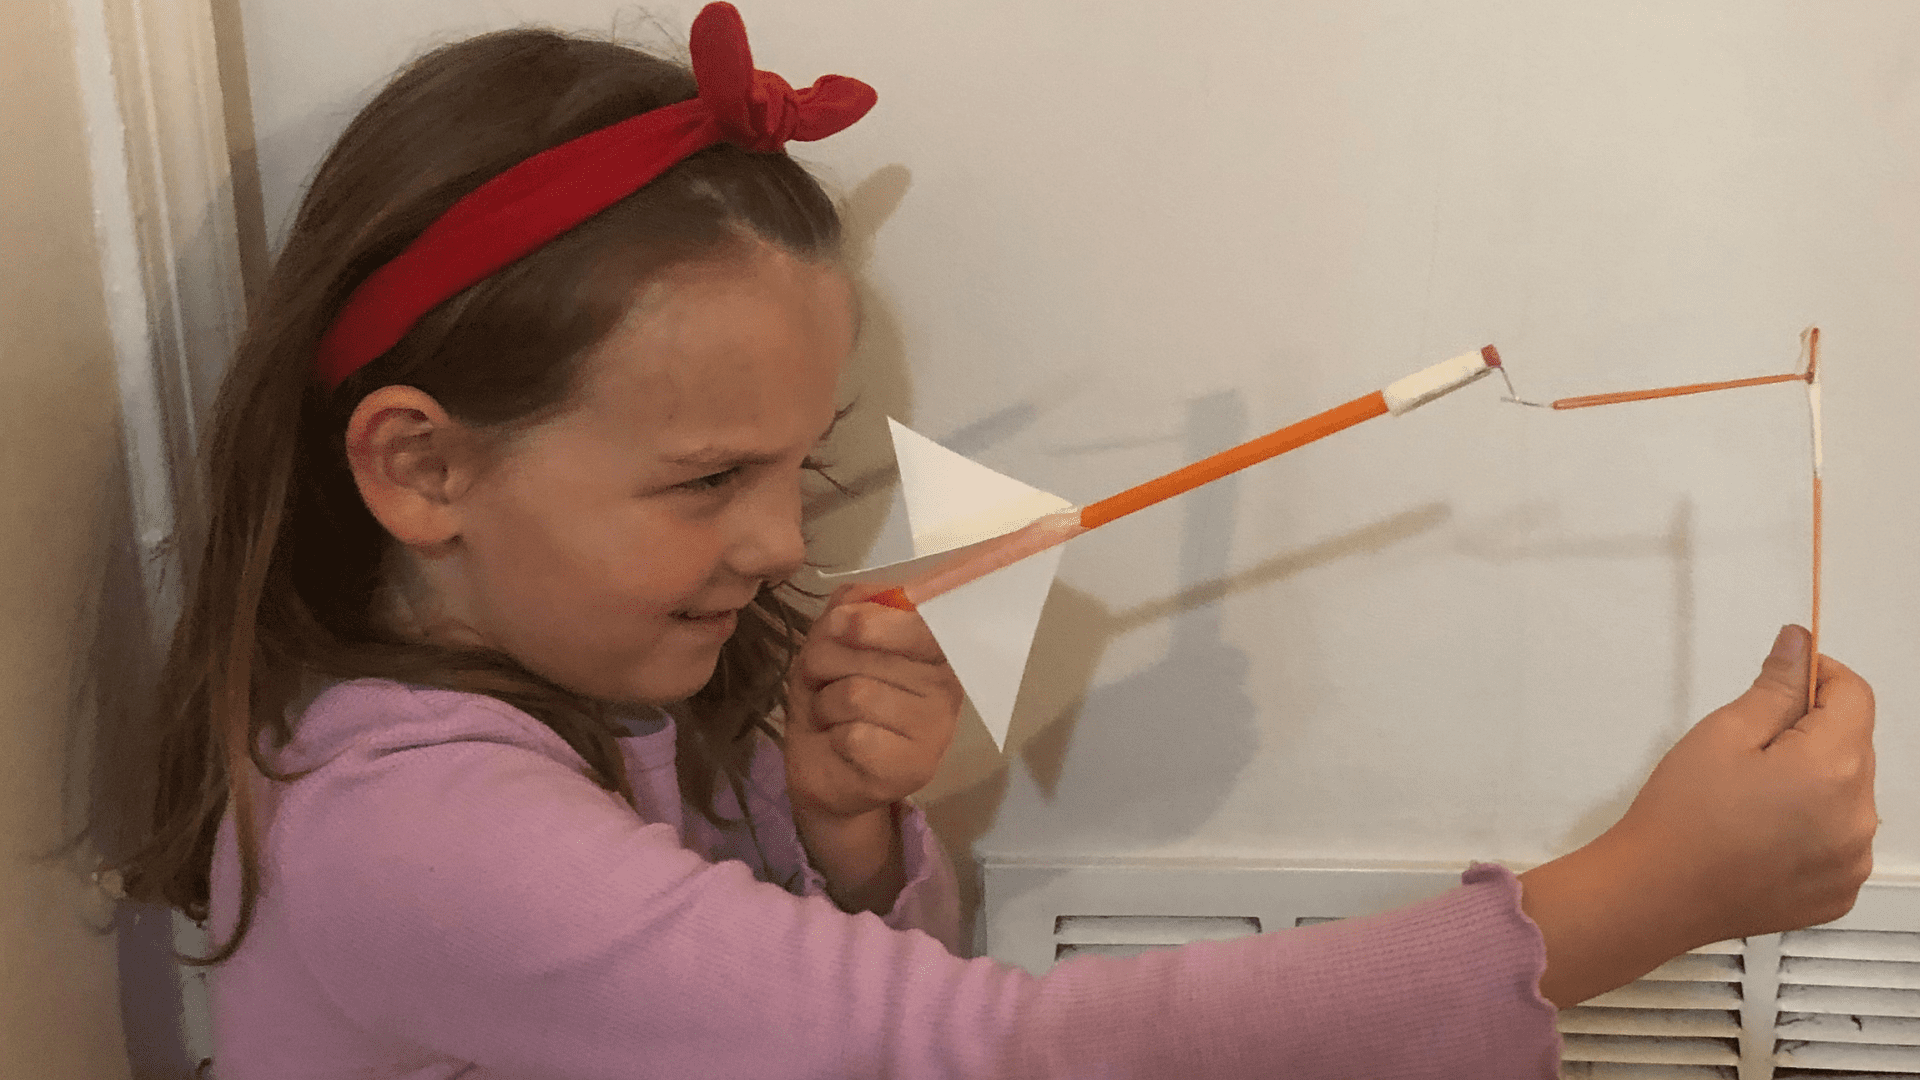 Slingshot Rockets Girl with a red bow aiming her homemade slingshot rocket